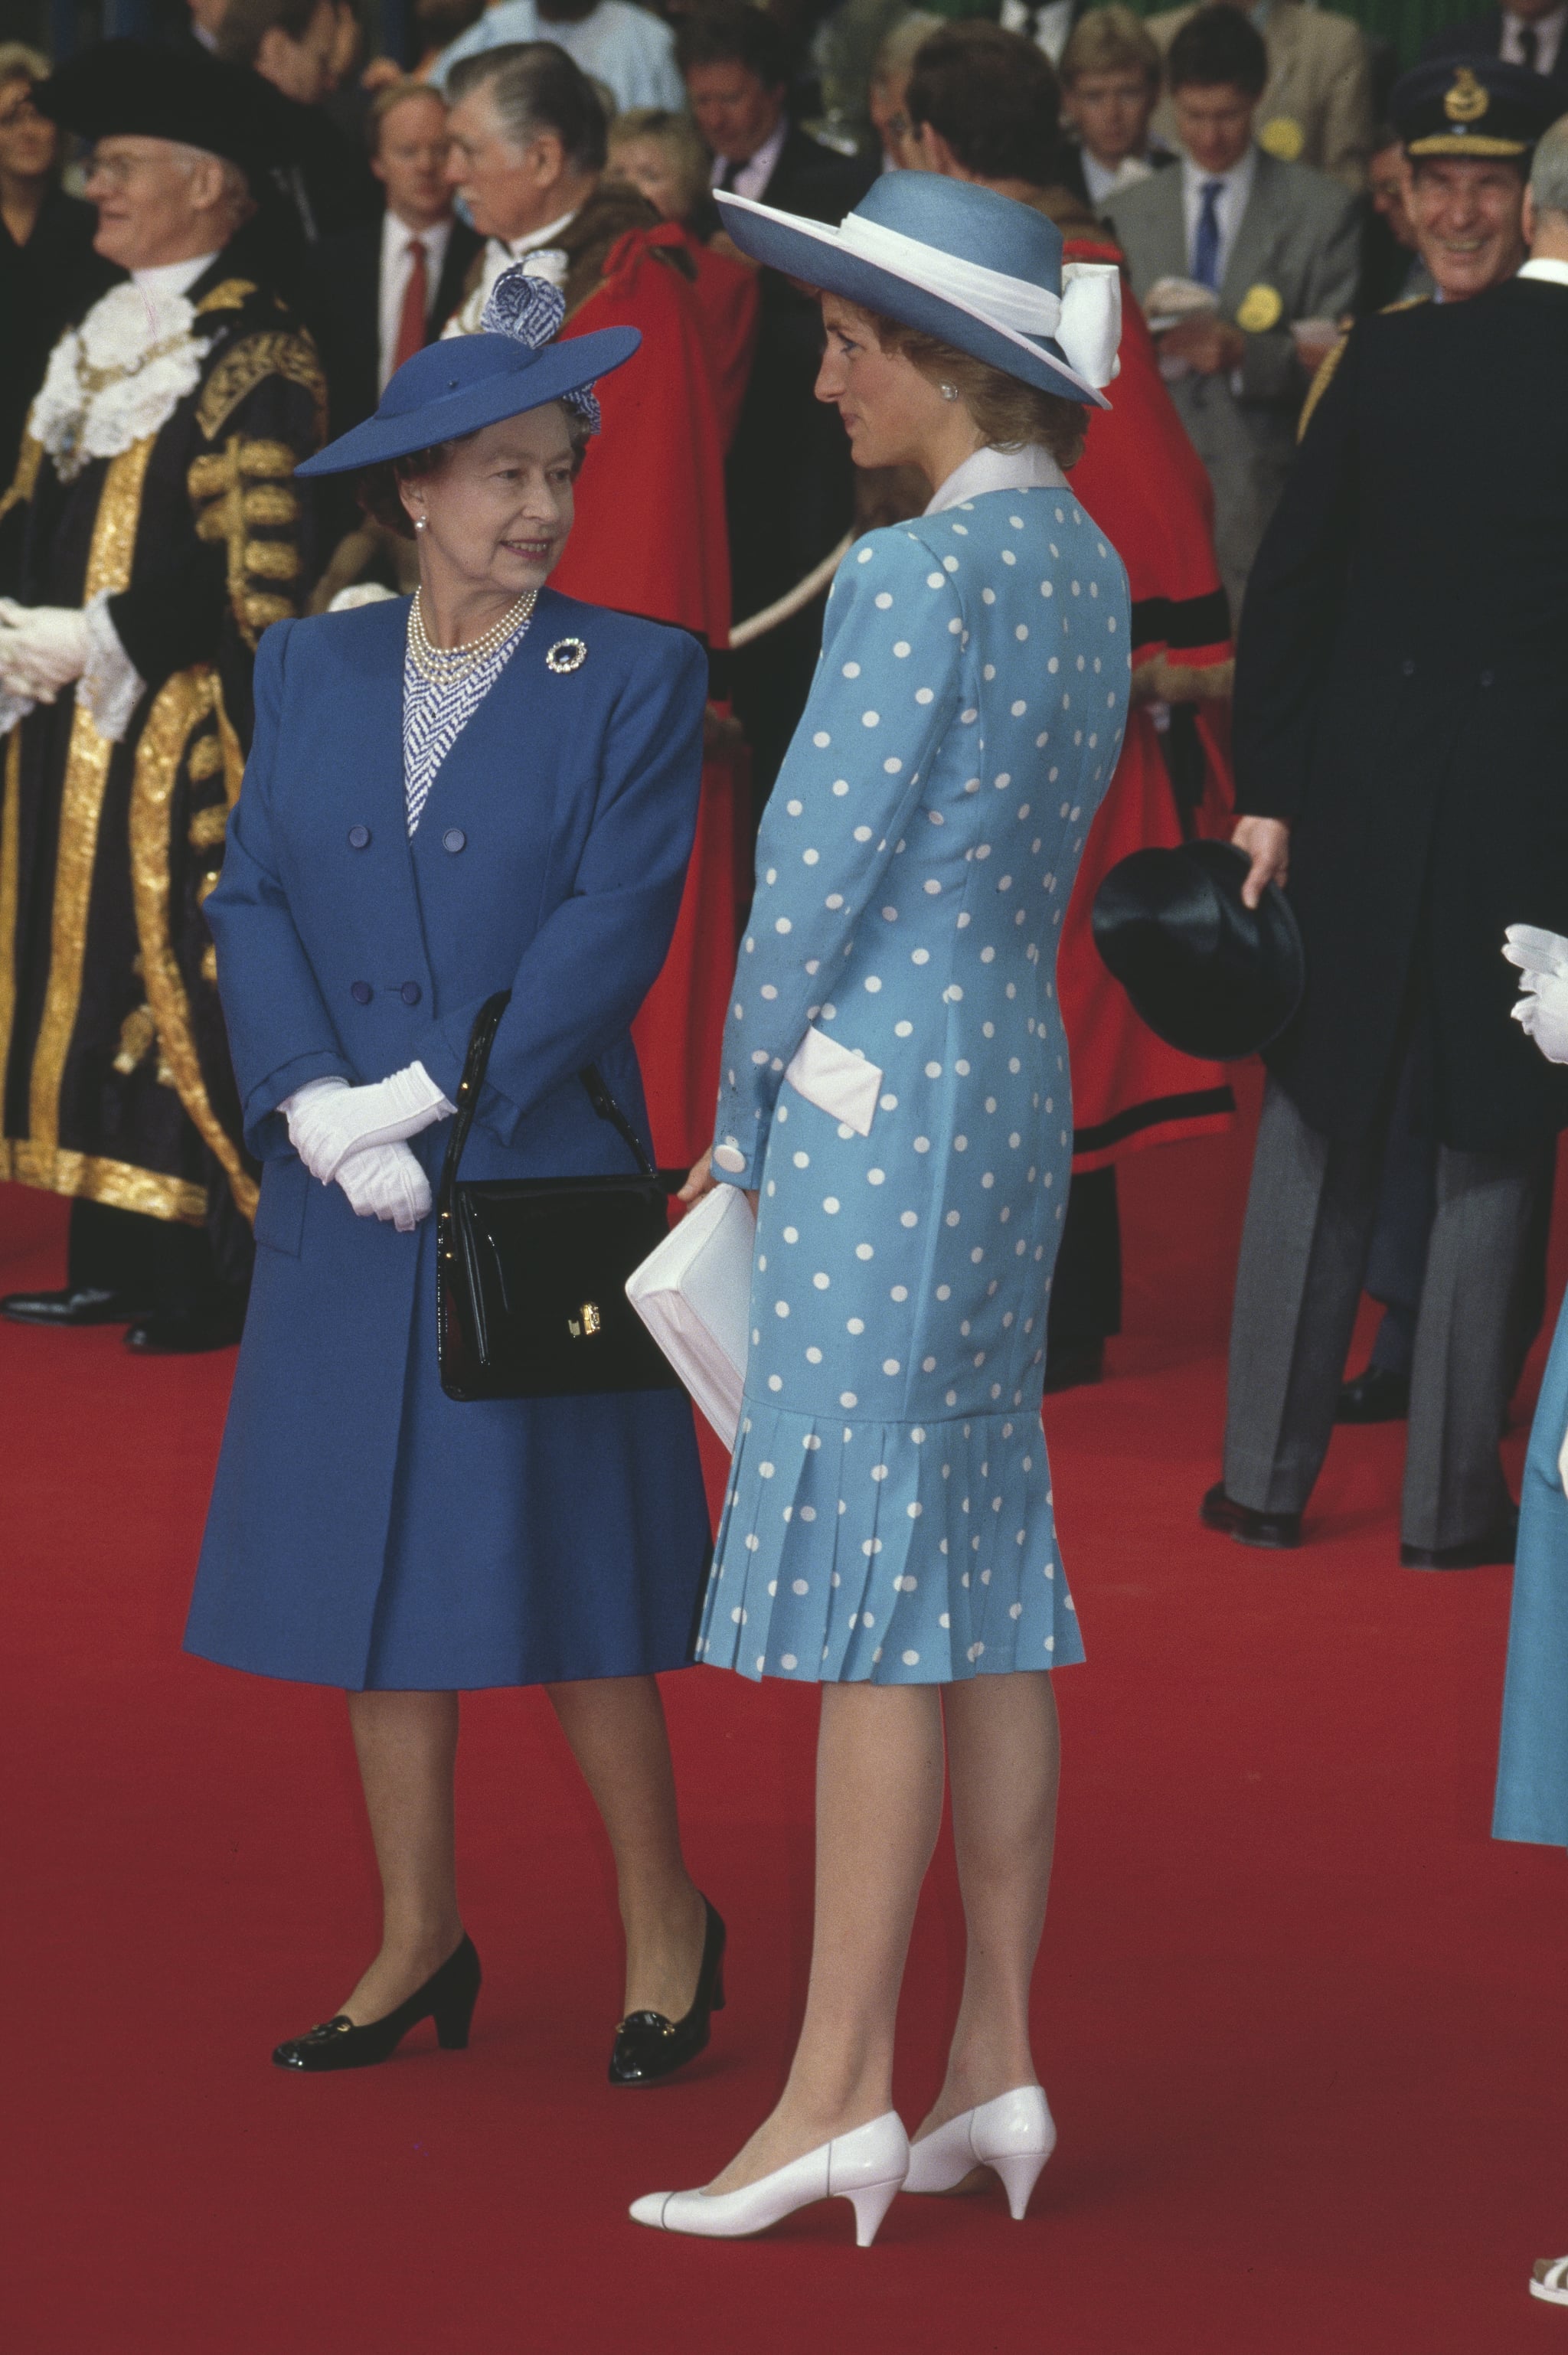 British royals Queen Elizabeth II and Diana, Princess of Wales (1961-1997) awaiting the arrival of West German President Richard von Weizsacker at the start of his State Visit, at Victoria Station in London, England, July 1986. (Photo by Princess Diana Archive/Getty Images)